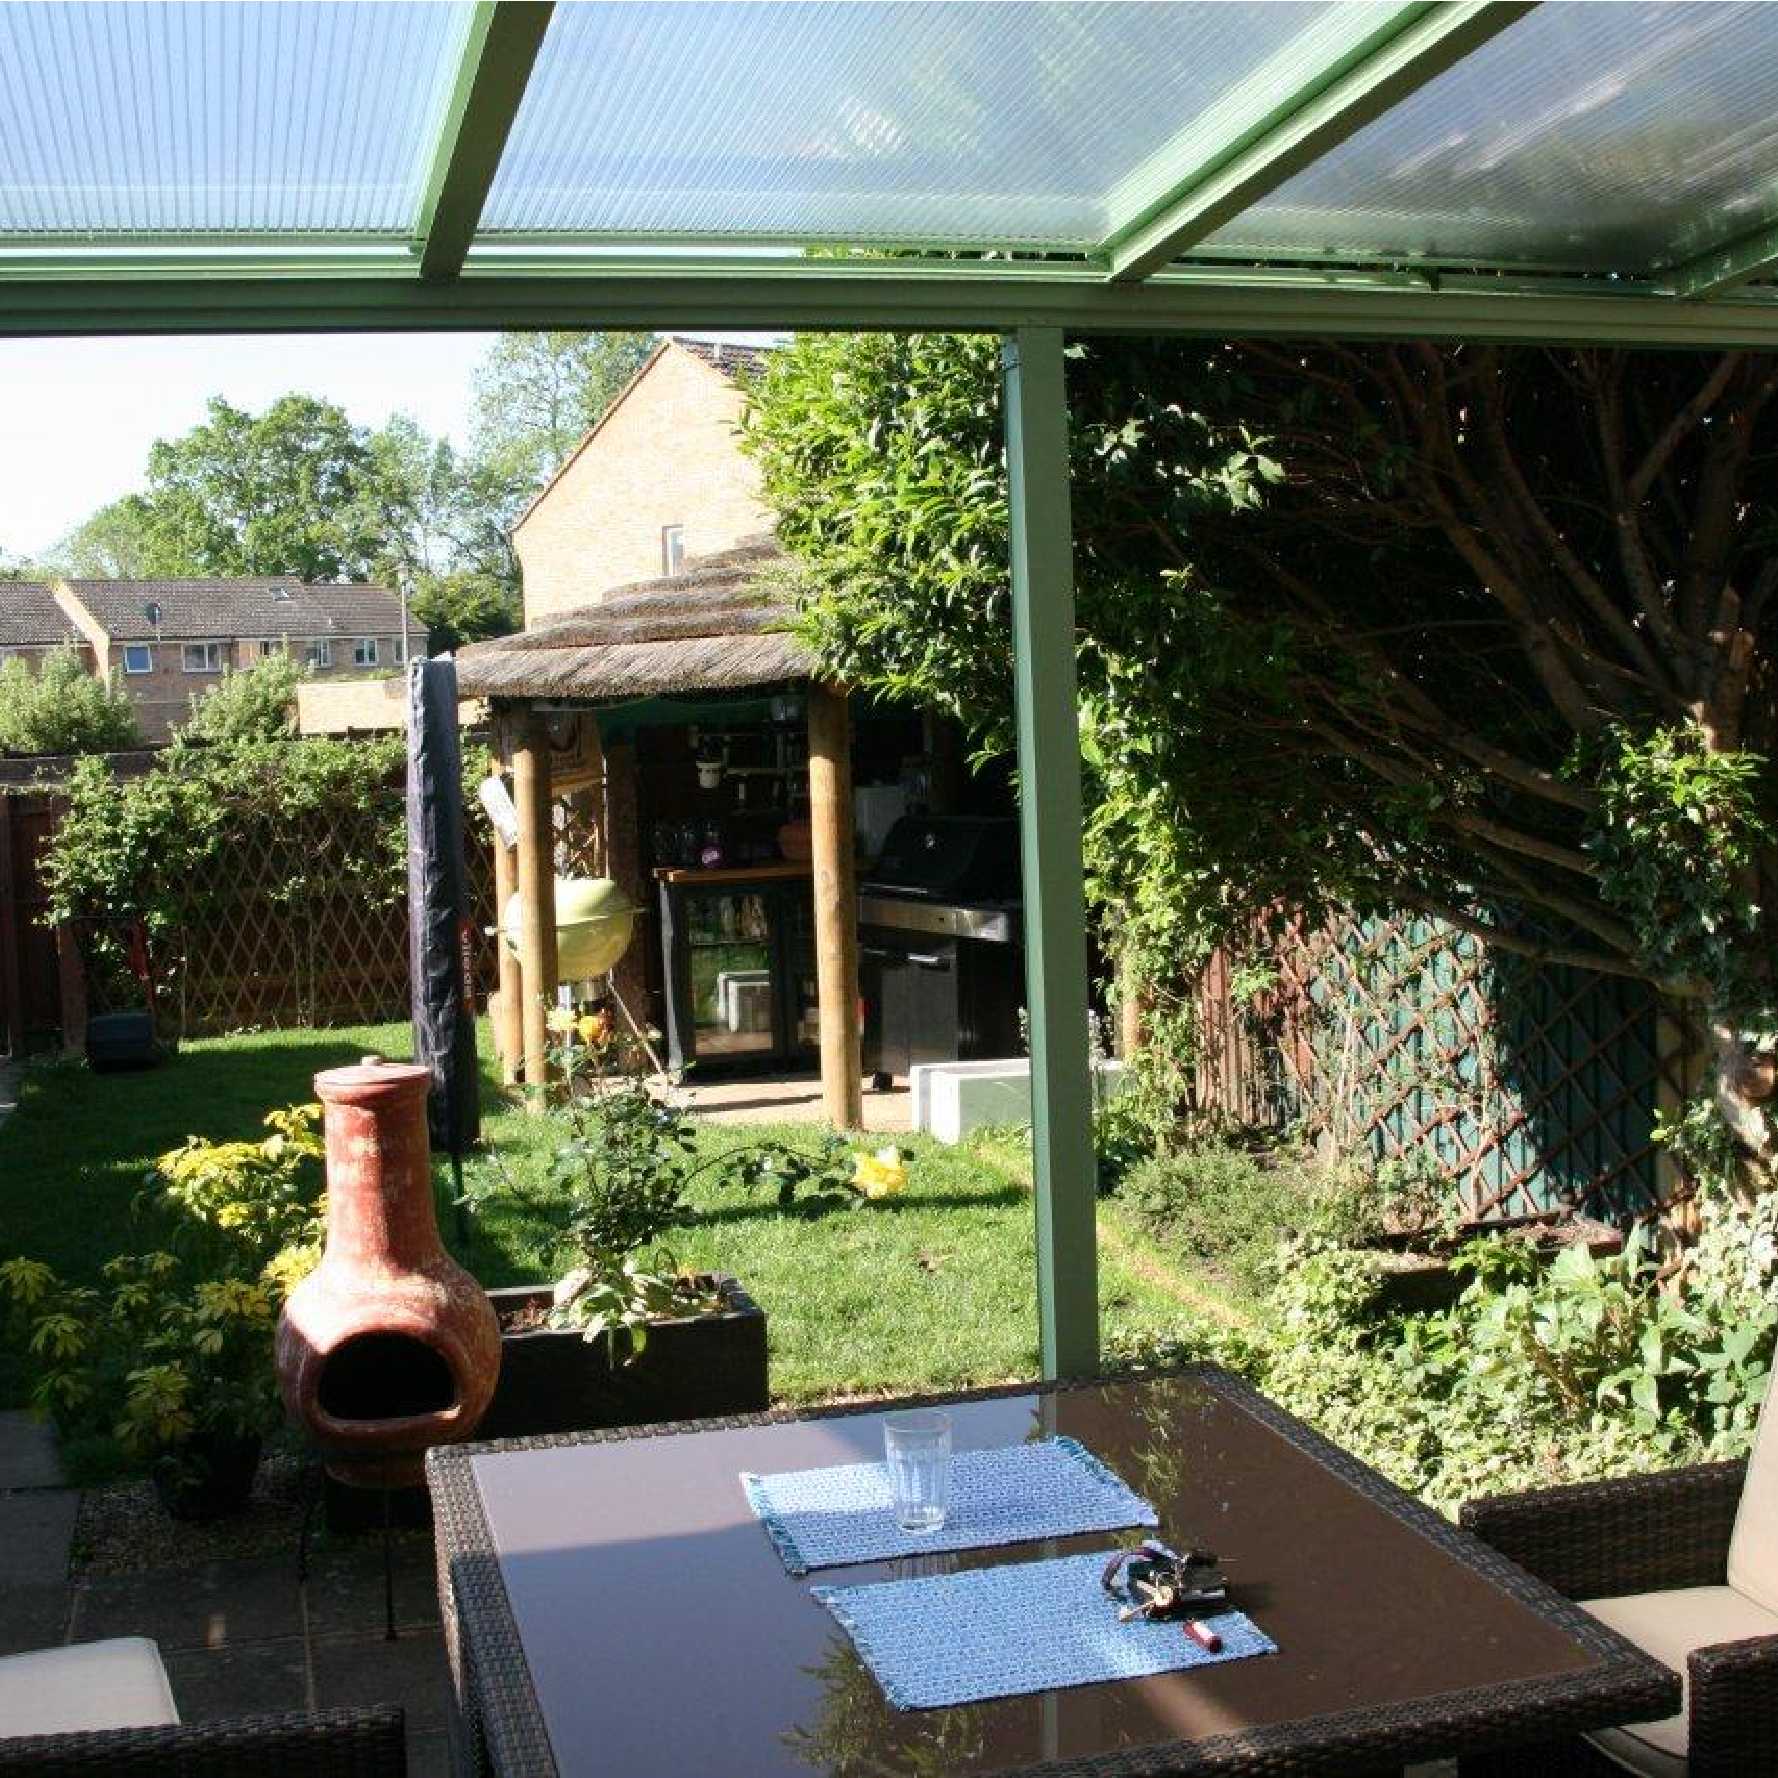 Affordable Omega Smart Lean-To Canopy, White with 16mm Polycarbonate Glazing - 7.8m (W) x 3.5m (P), (4) Supporting Posts